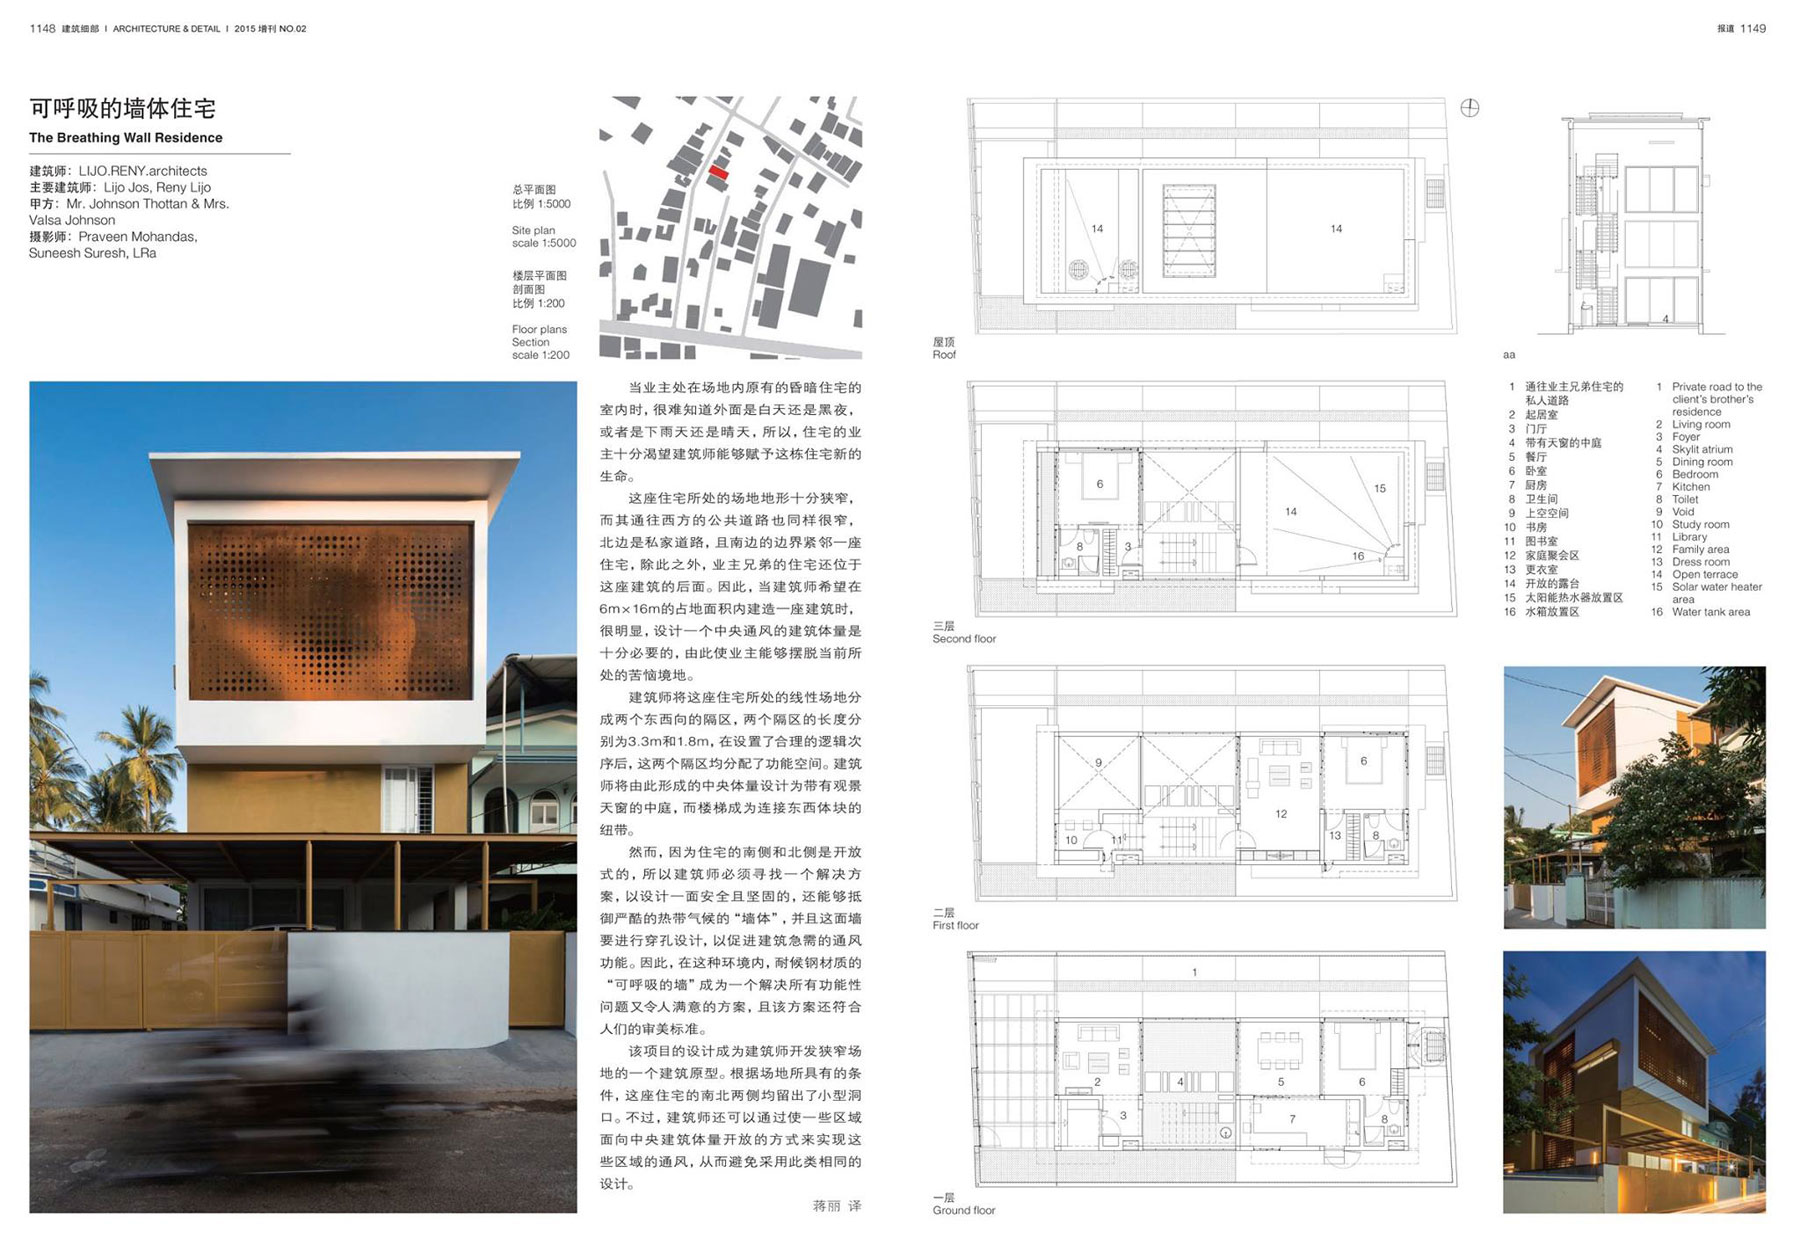 design-detail-magazine-china-feature-the-breathing-wall-residence-2